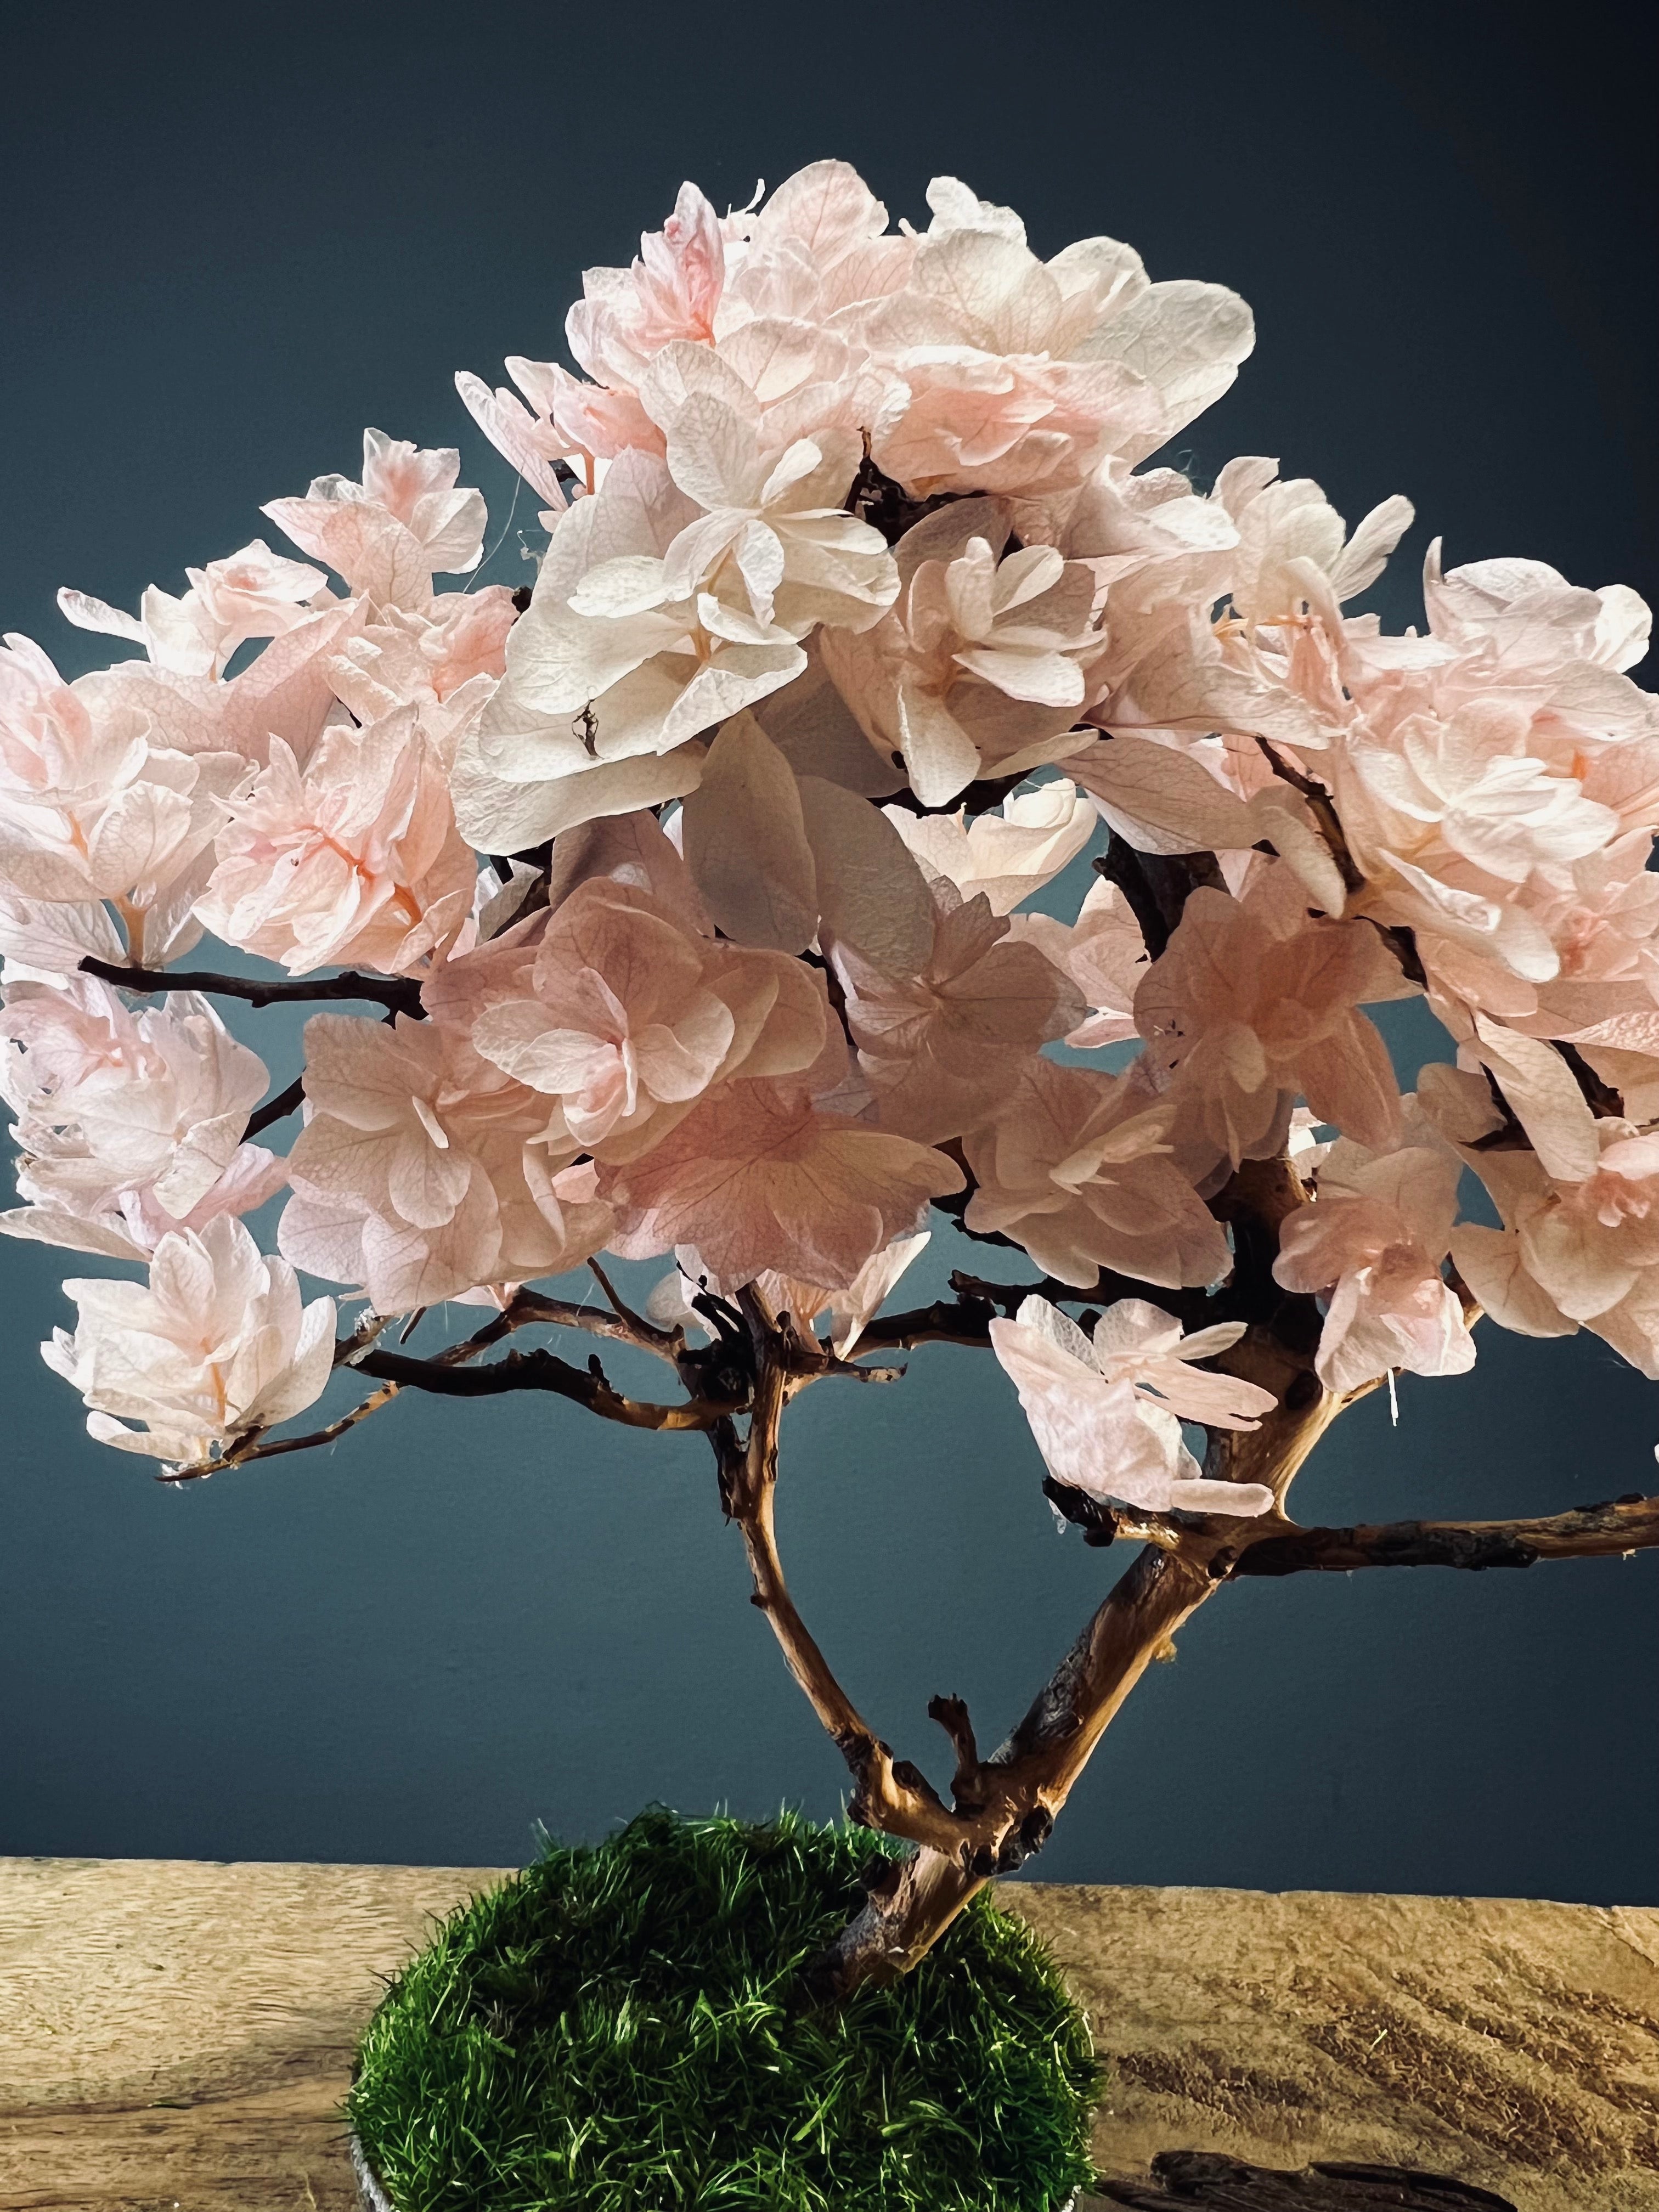 A Small Tree in the East - Sakura - Larger version (Preserved Plants)